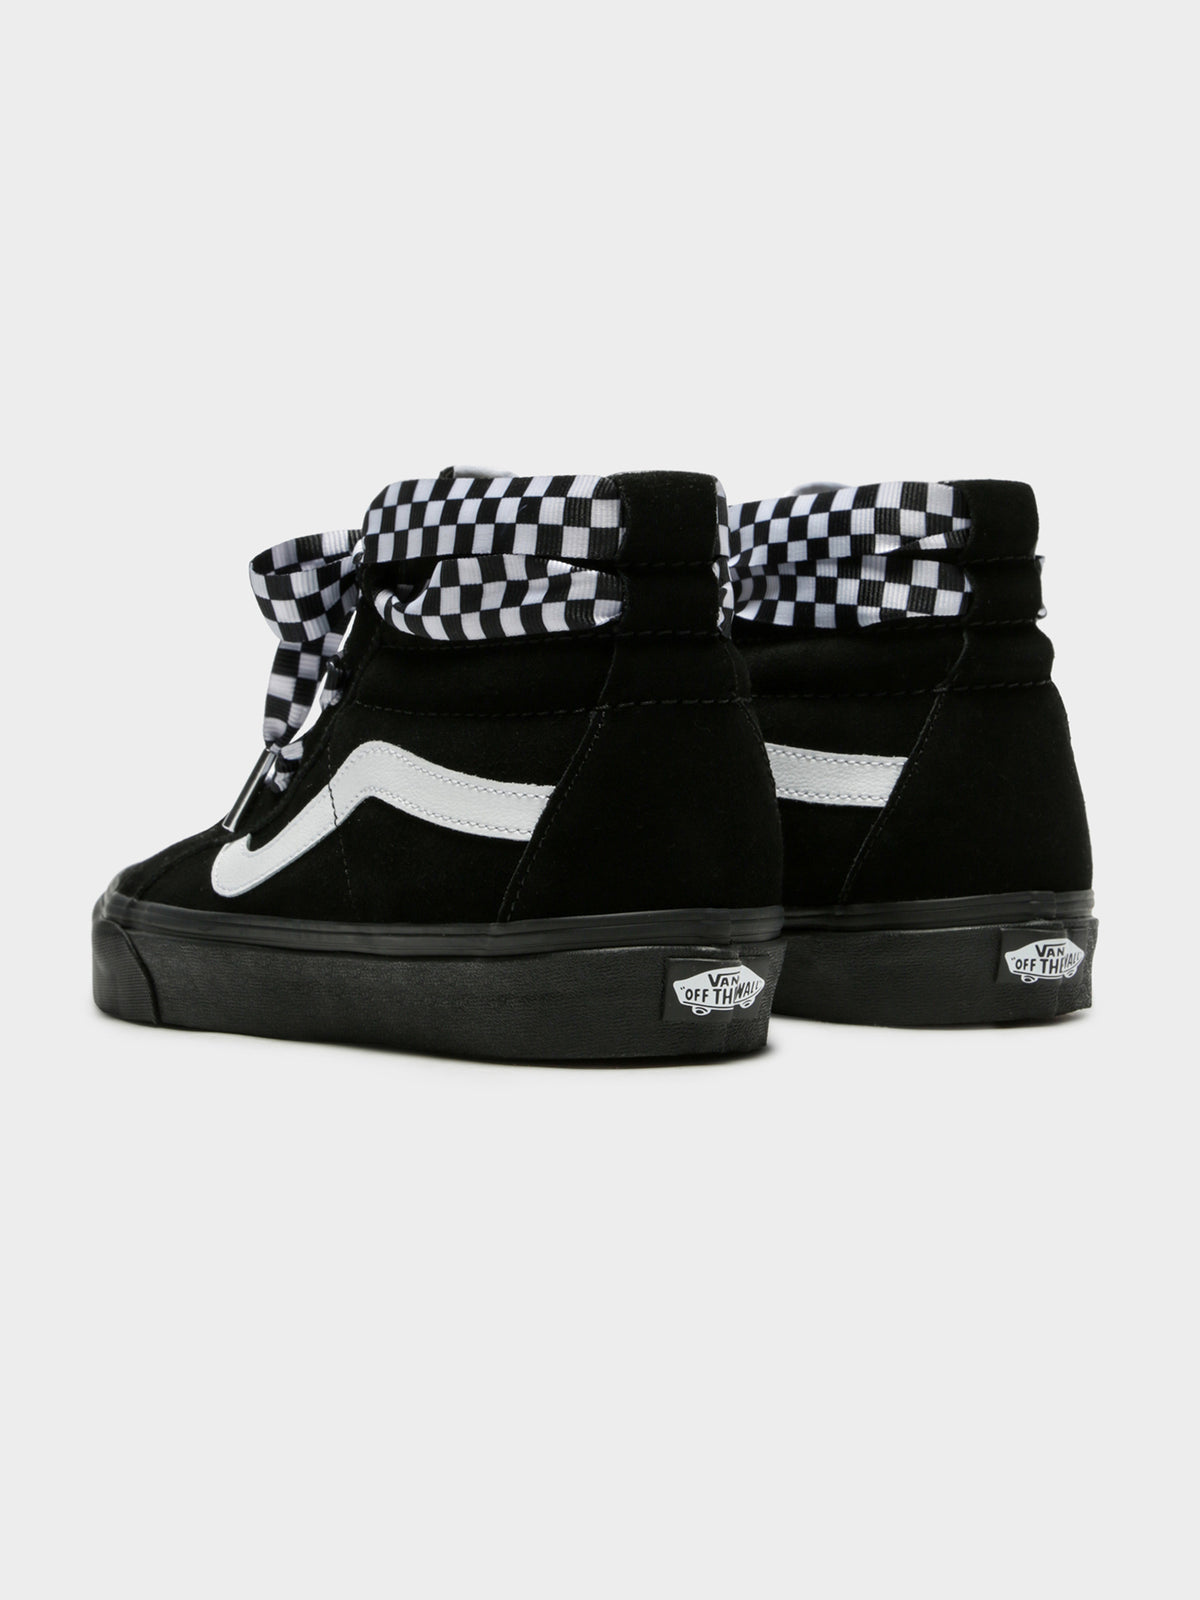 Womens SK8 Lace Check Wrap High Top Sneaker in Black